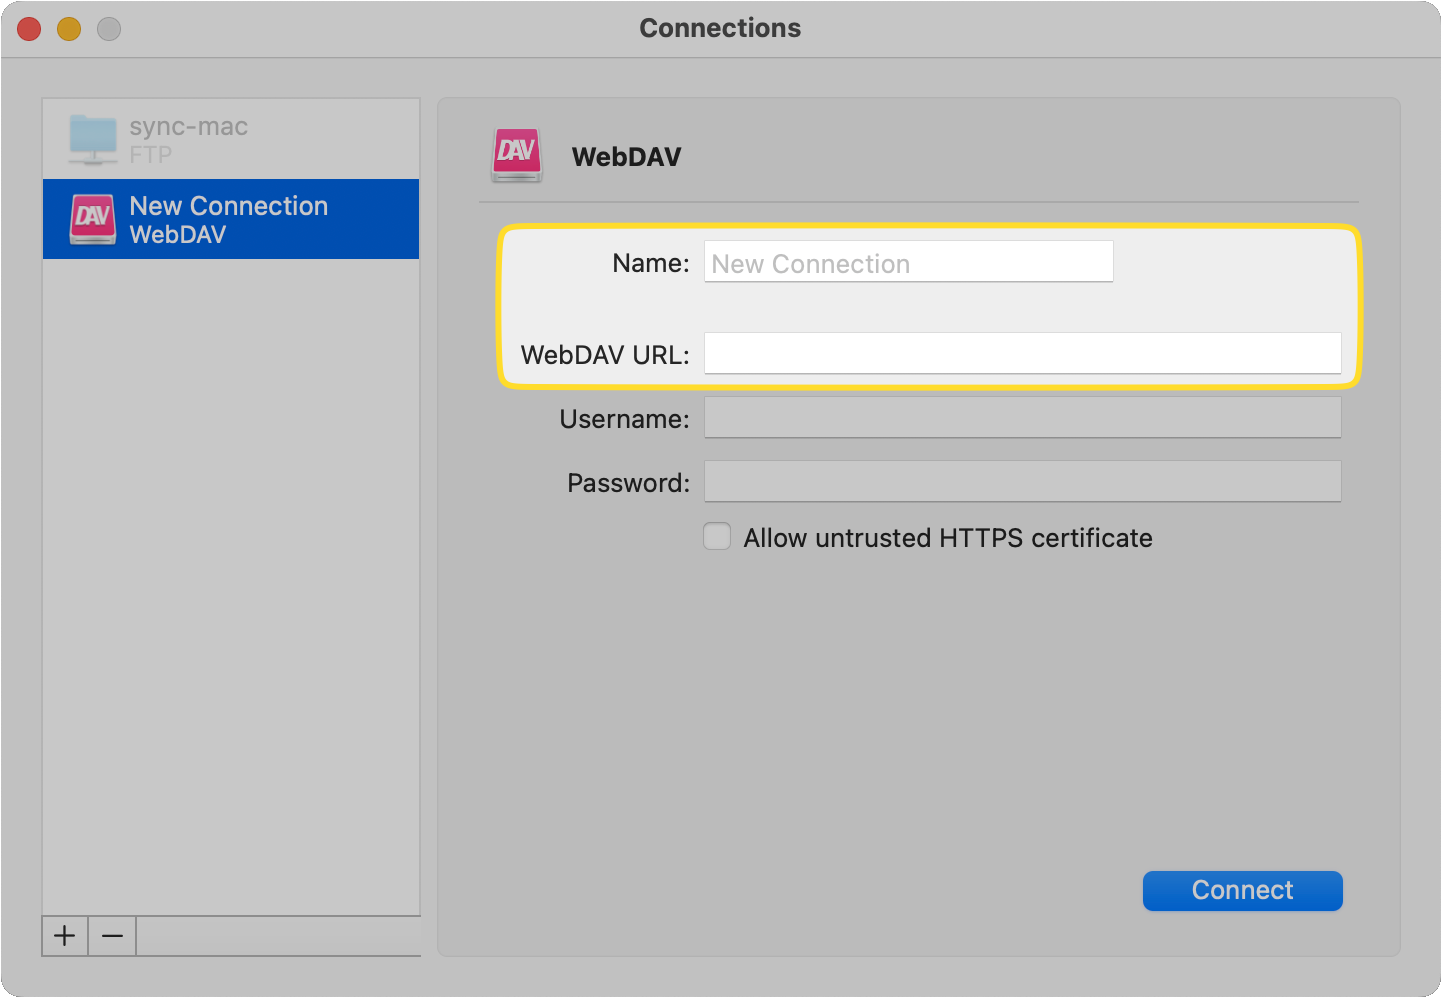 The Name and WebDAV URL fields of the new WebDAV connection are outlined